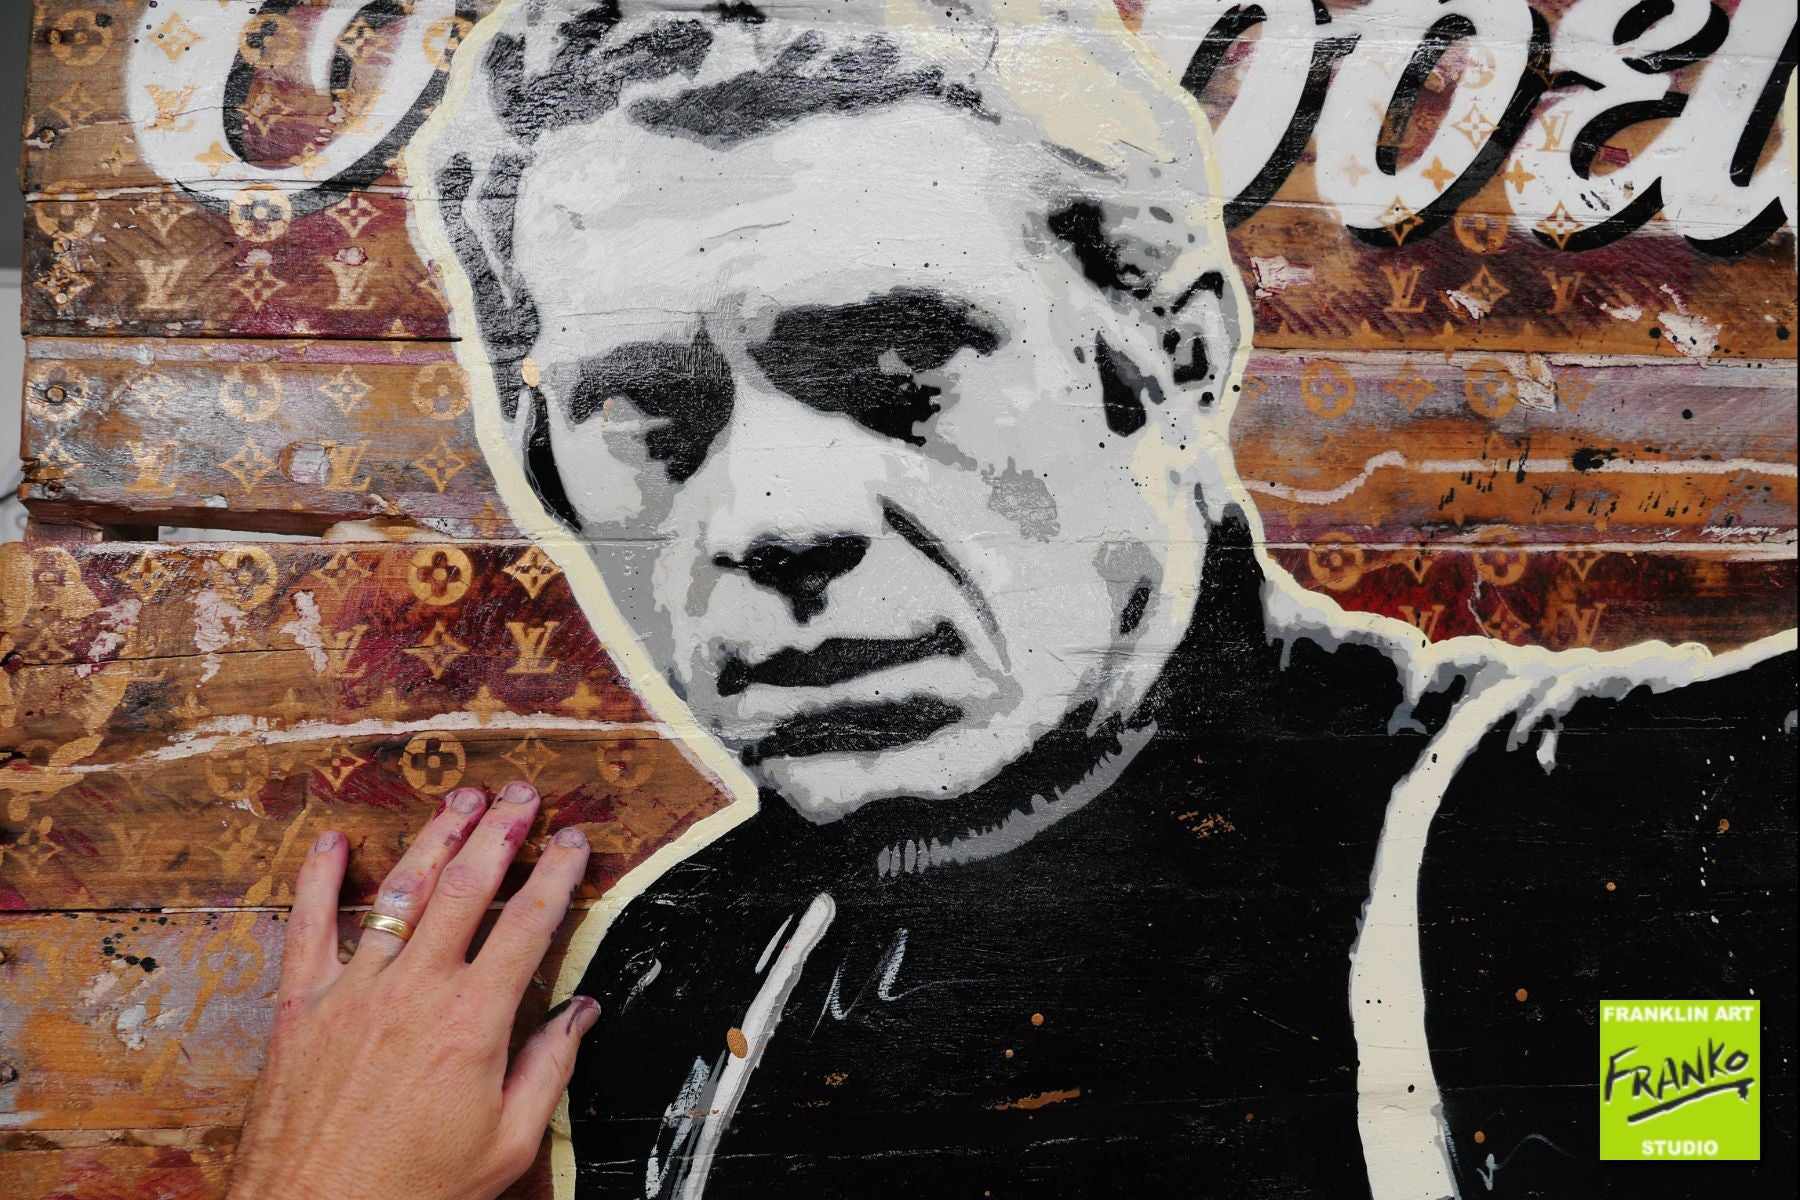 I Live For Myself 101cm x 122cm Steve McQueen Recycled Timber Crate Urban Pop Art Painting (SOLD)